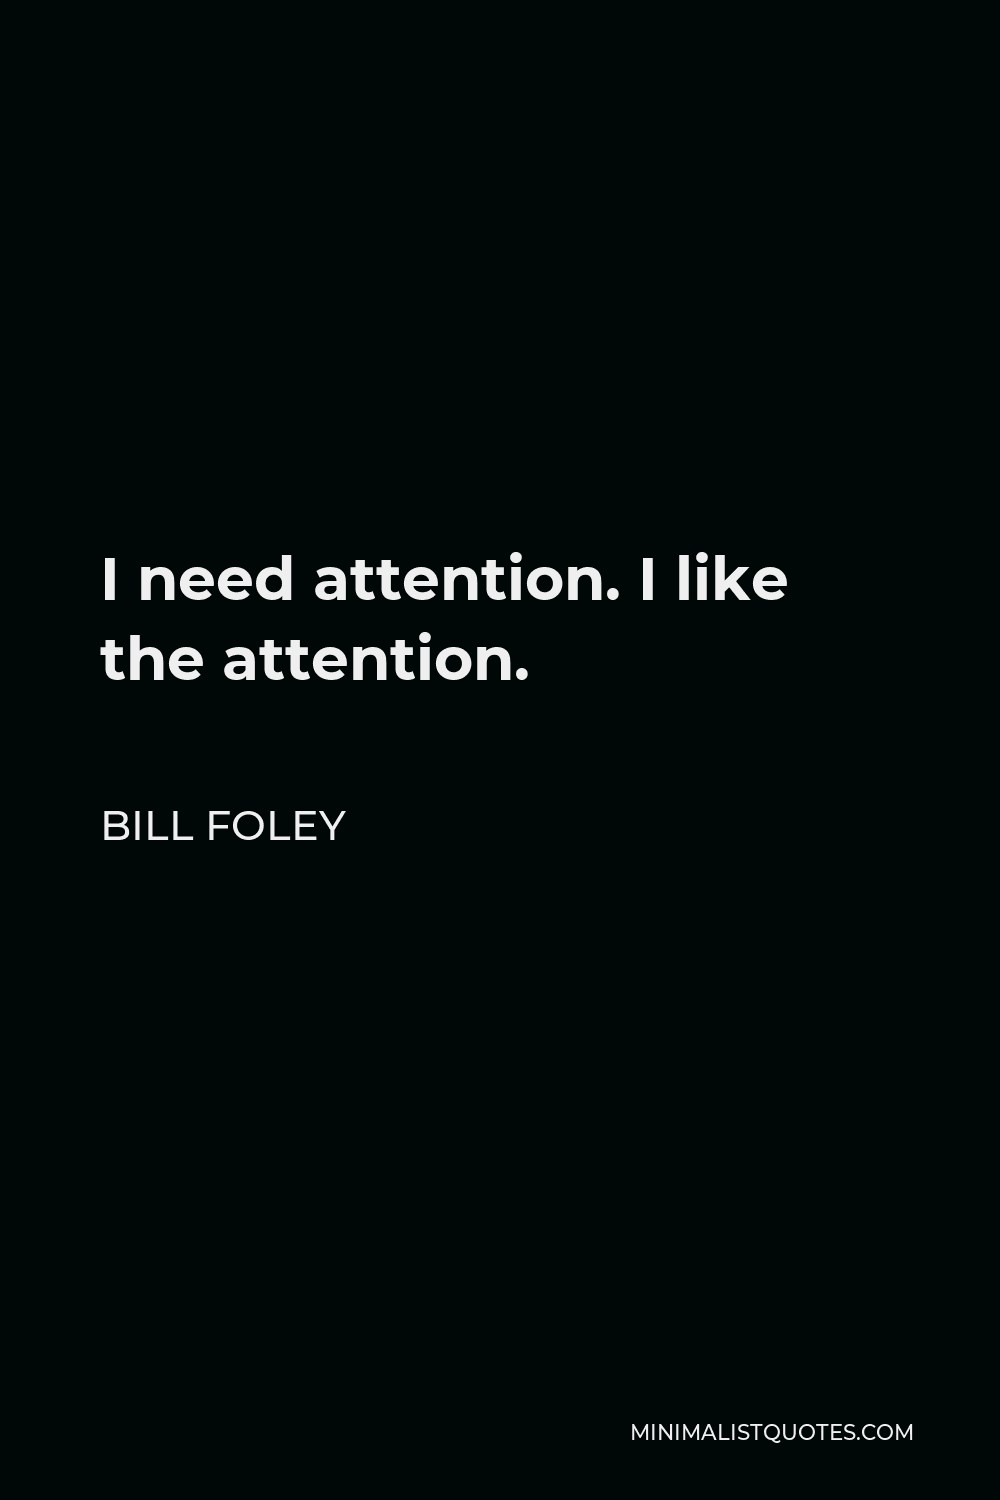 Bill Foley Quote - I need attention. I like the attention.